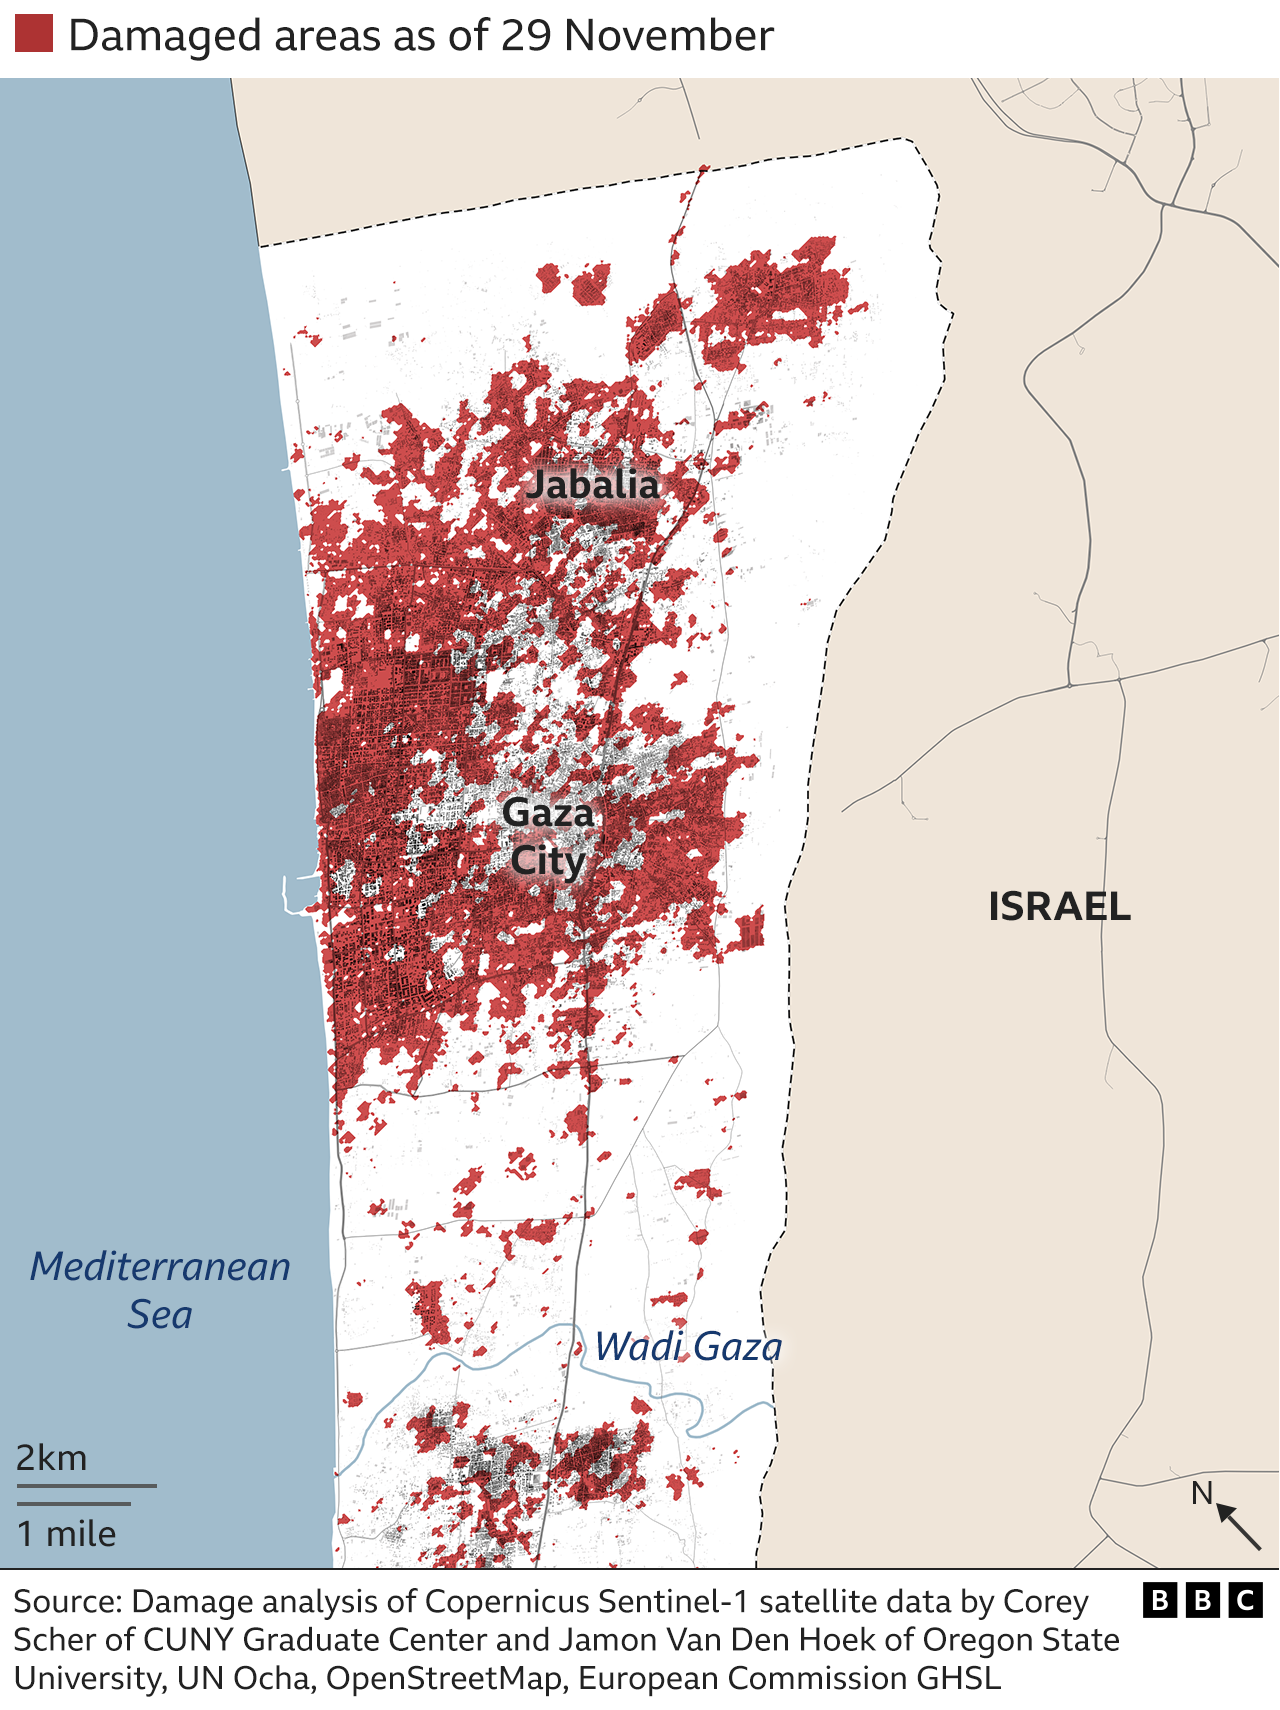 Map showing satellite analysis of damage to buildings in northern Gaza as of November 29.